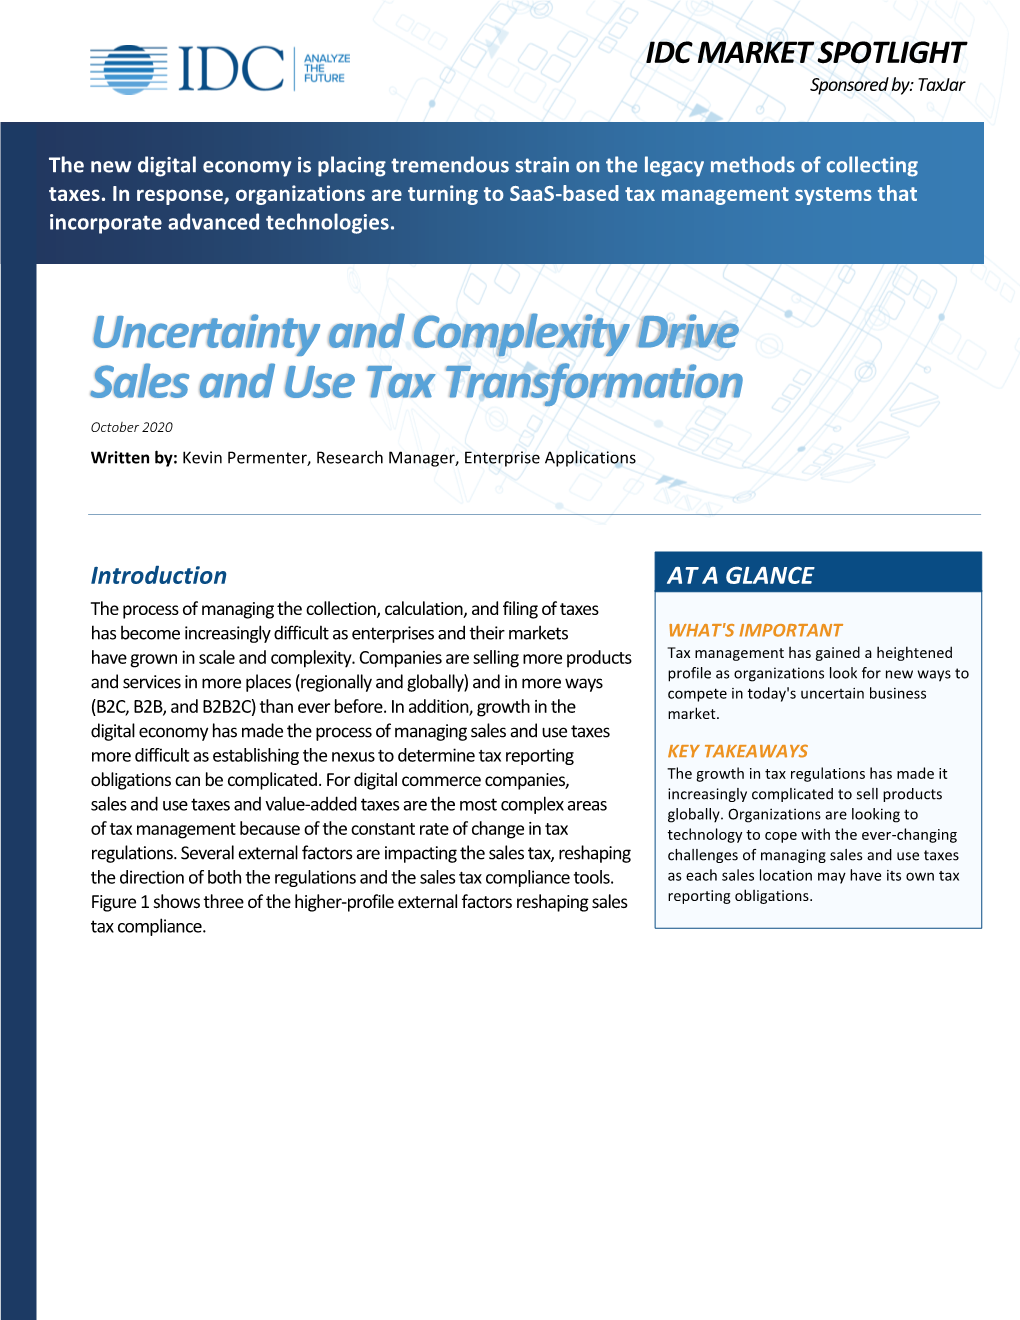 IDC-Market-Spotlight-Uncertainty-And-Complexity-Drives-Sales-And-Use-Tax